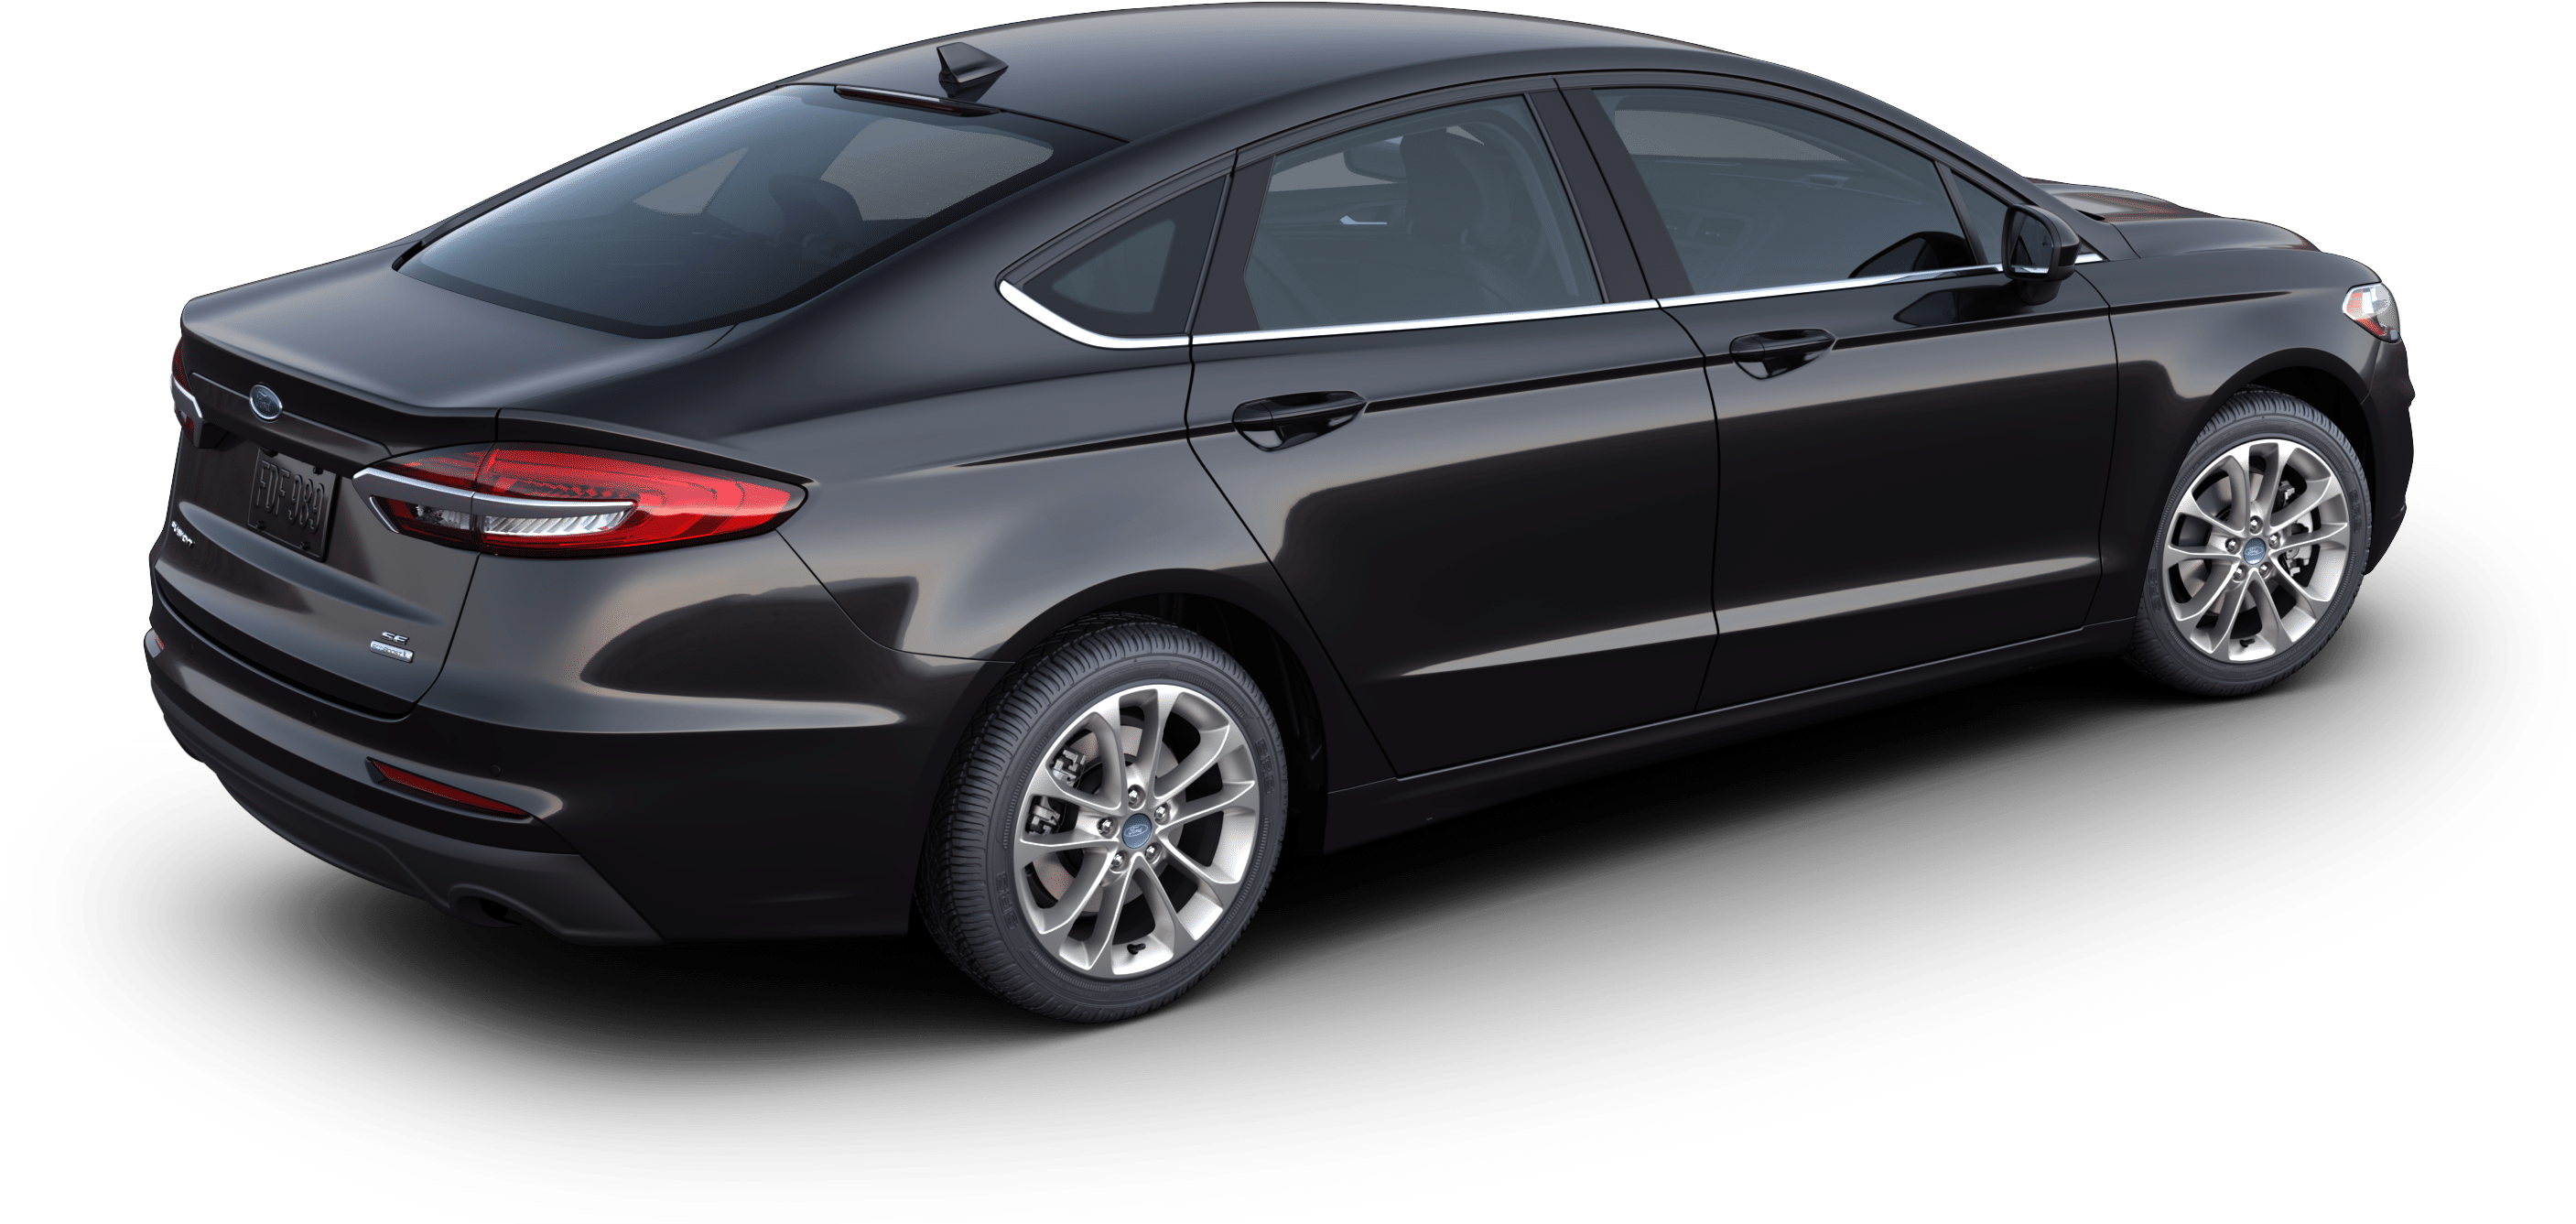 2020 Ford Fusion Vehicle Photo In Cleveland, Ms 38732-2355 - 2019 Ford Fusion Hybrid, Hd Png Download